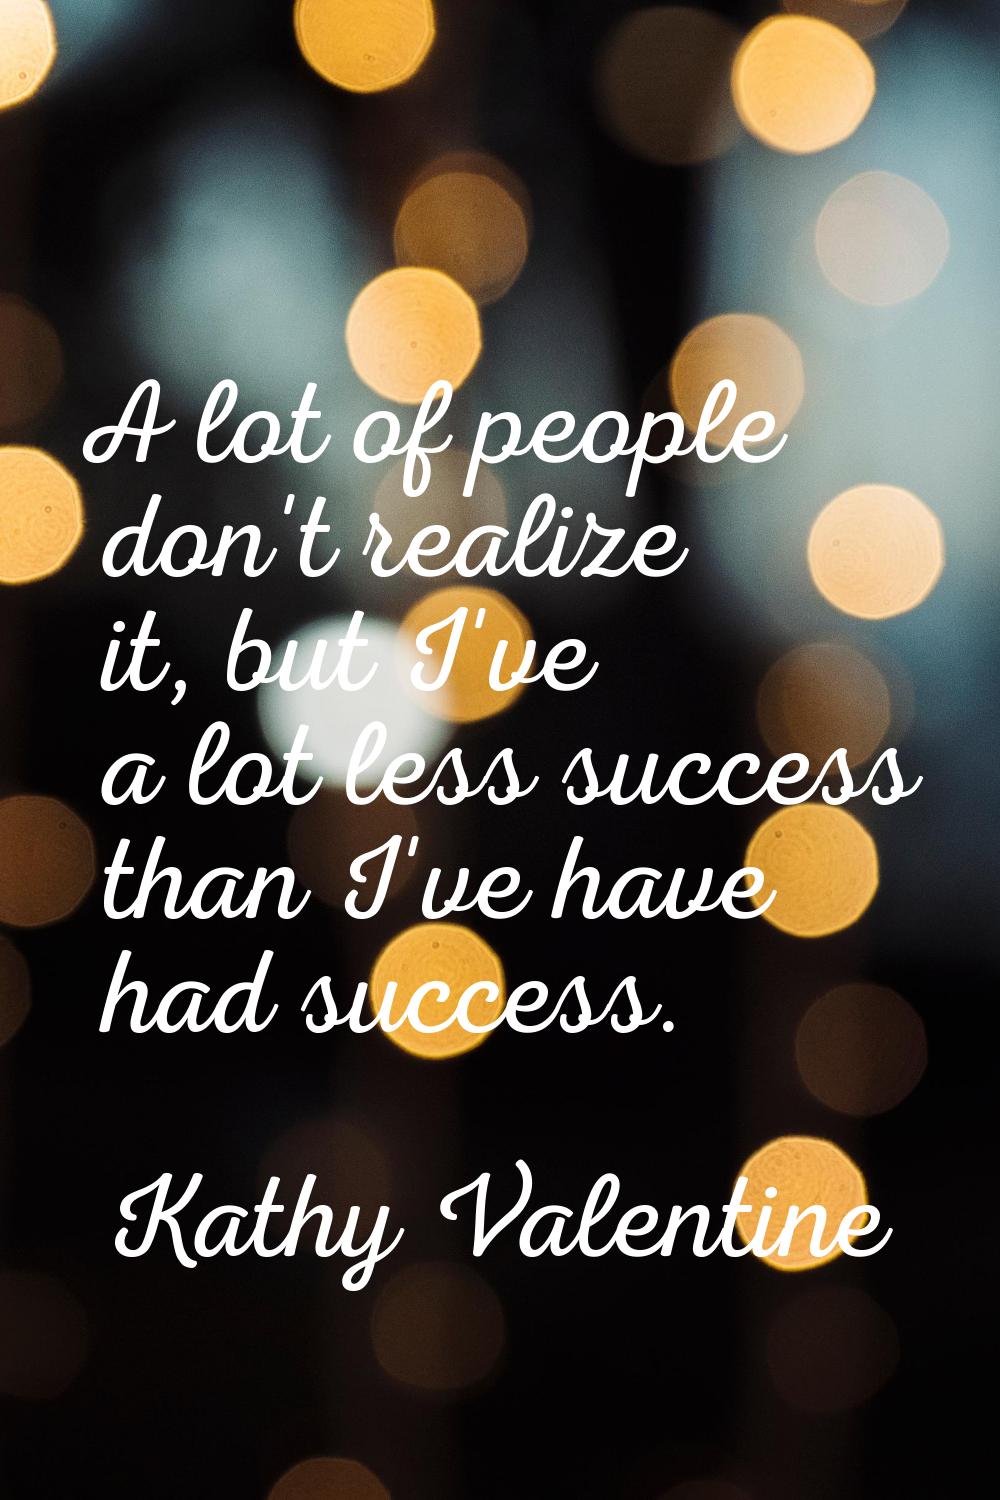 A lot of people don't realize it, but I've a lot less success than I've have had success.